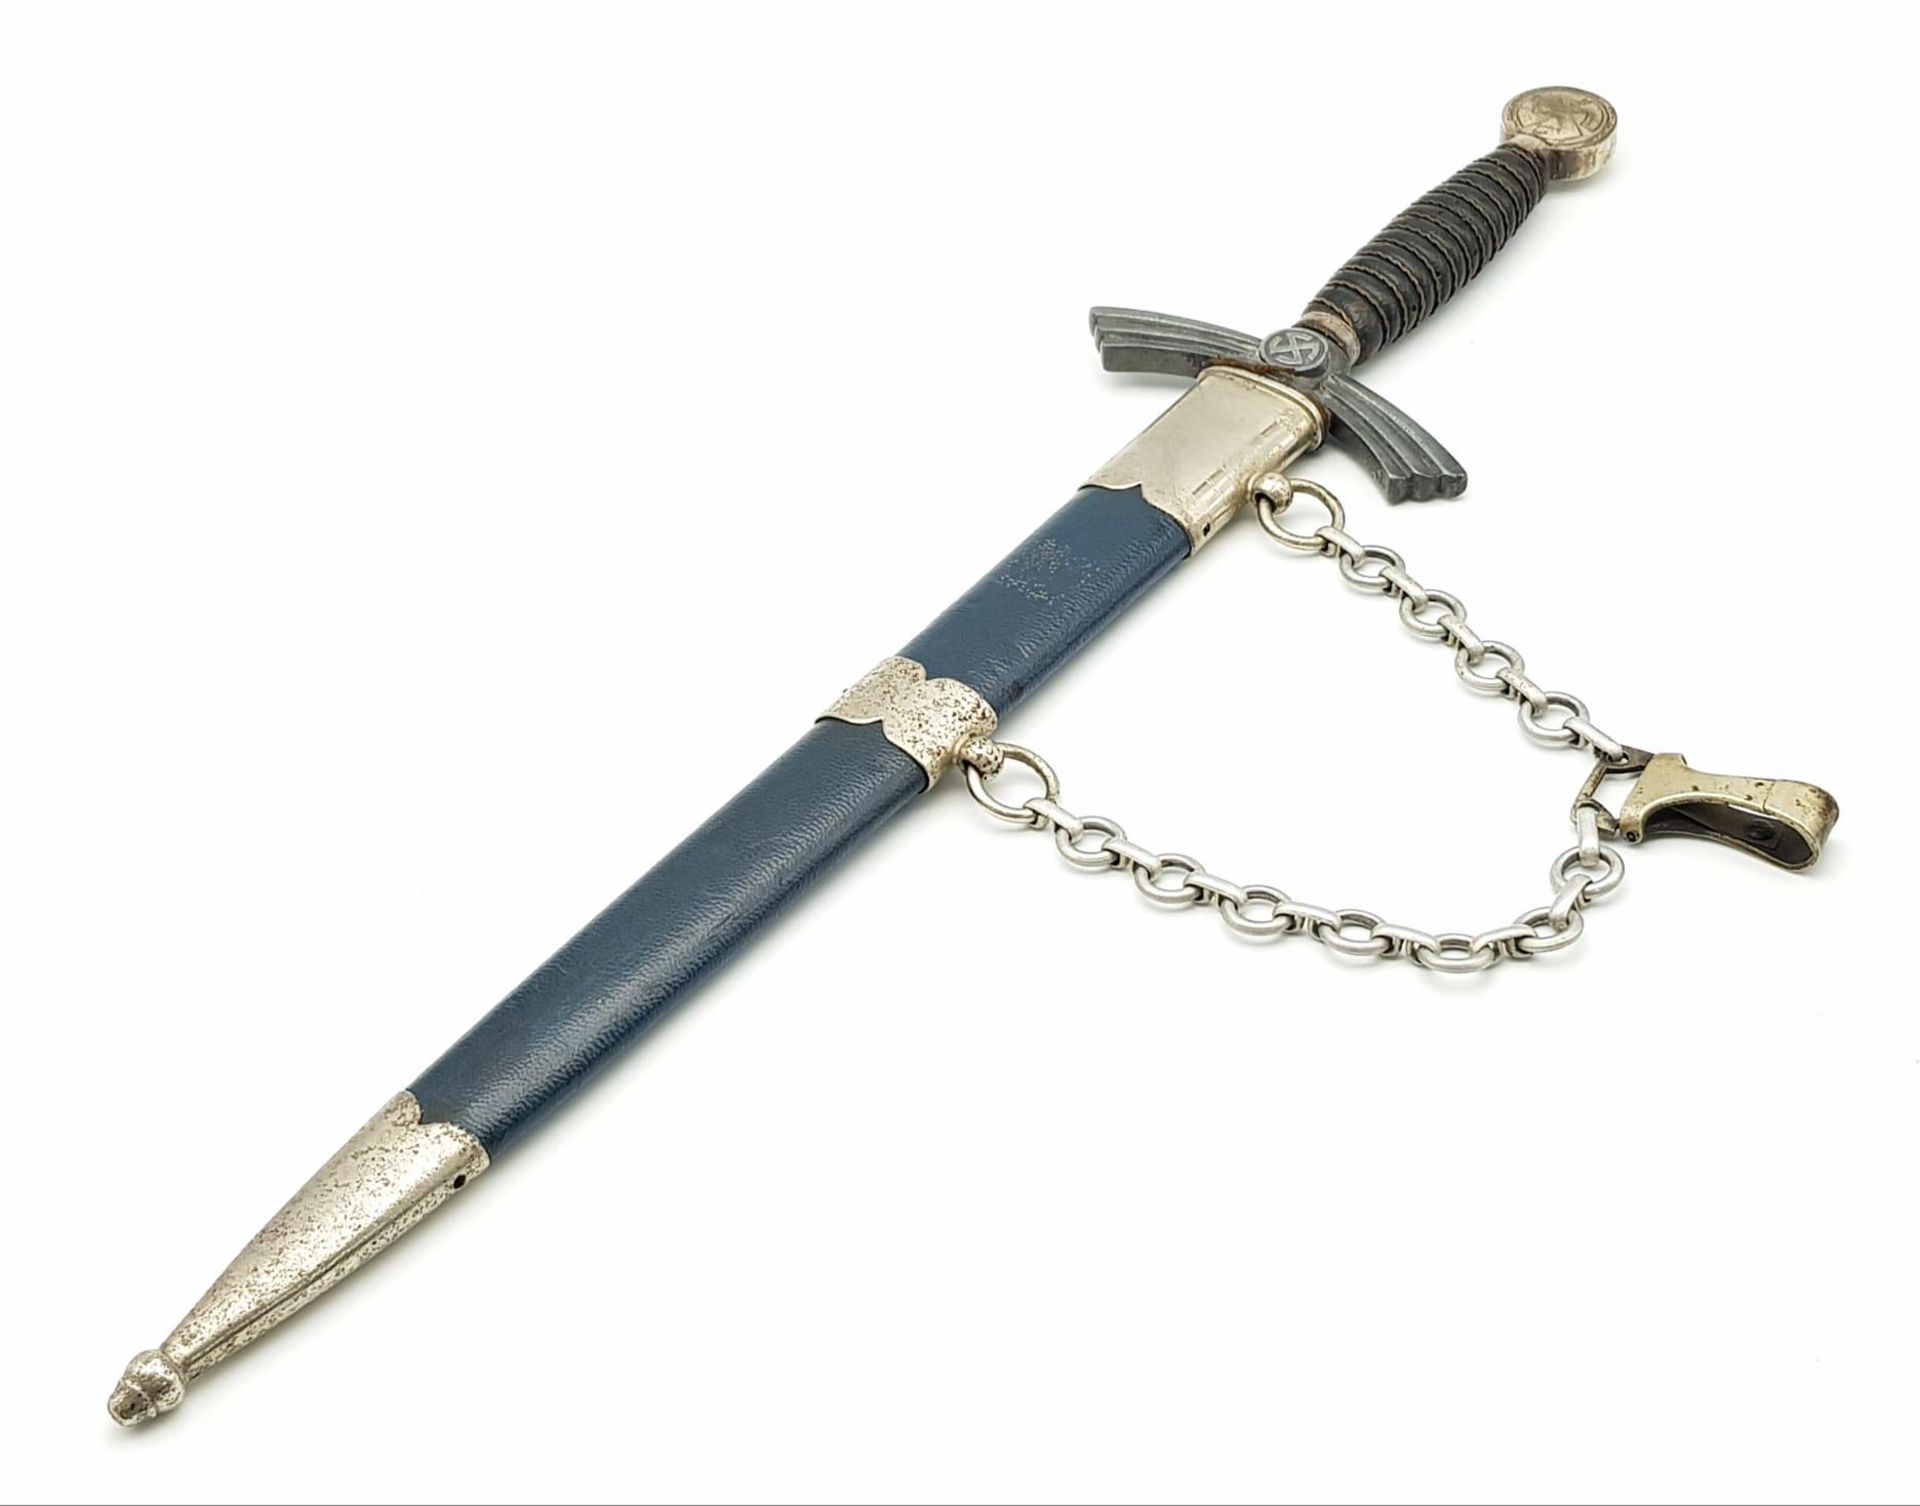 A Blue Luftwaffe Dagger - 1st Model by FW Holler. The mounts and hilt are solid nickel. The sun- - Image 7 of 7